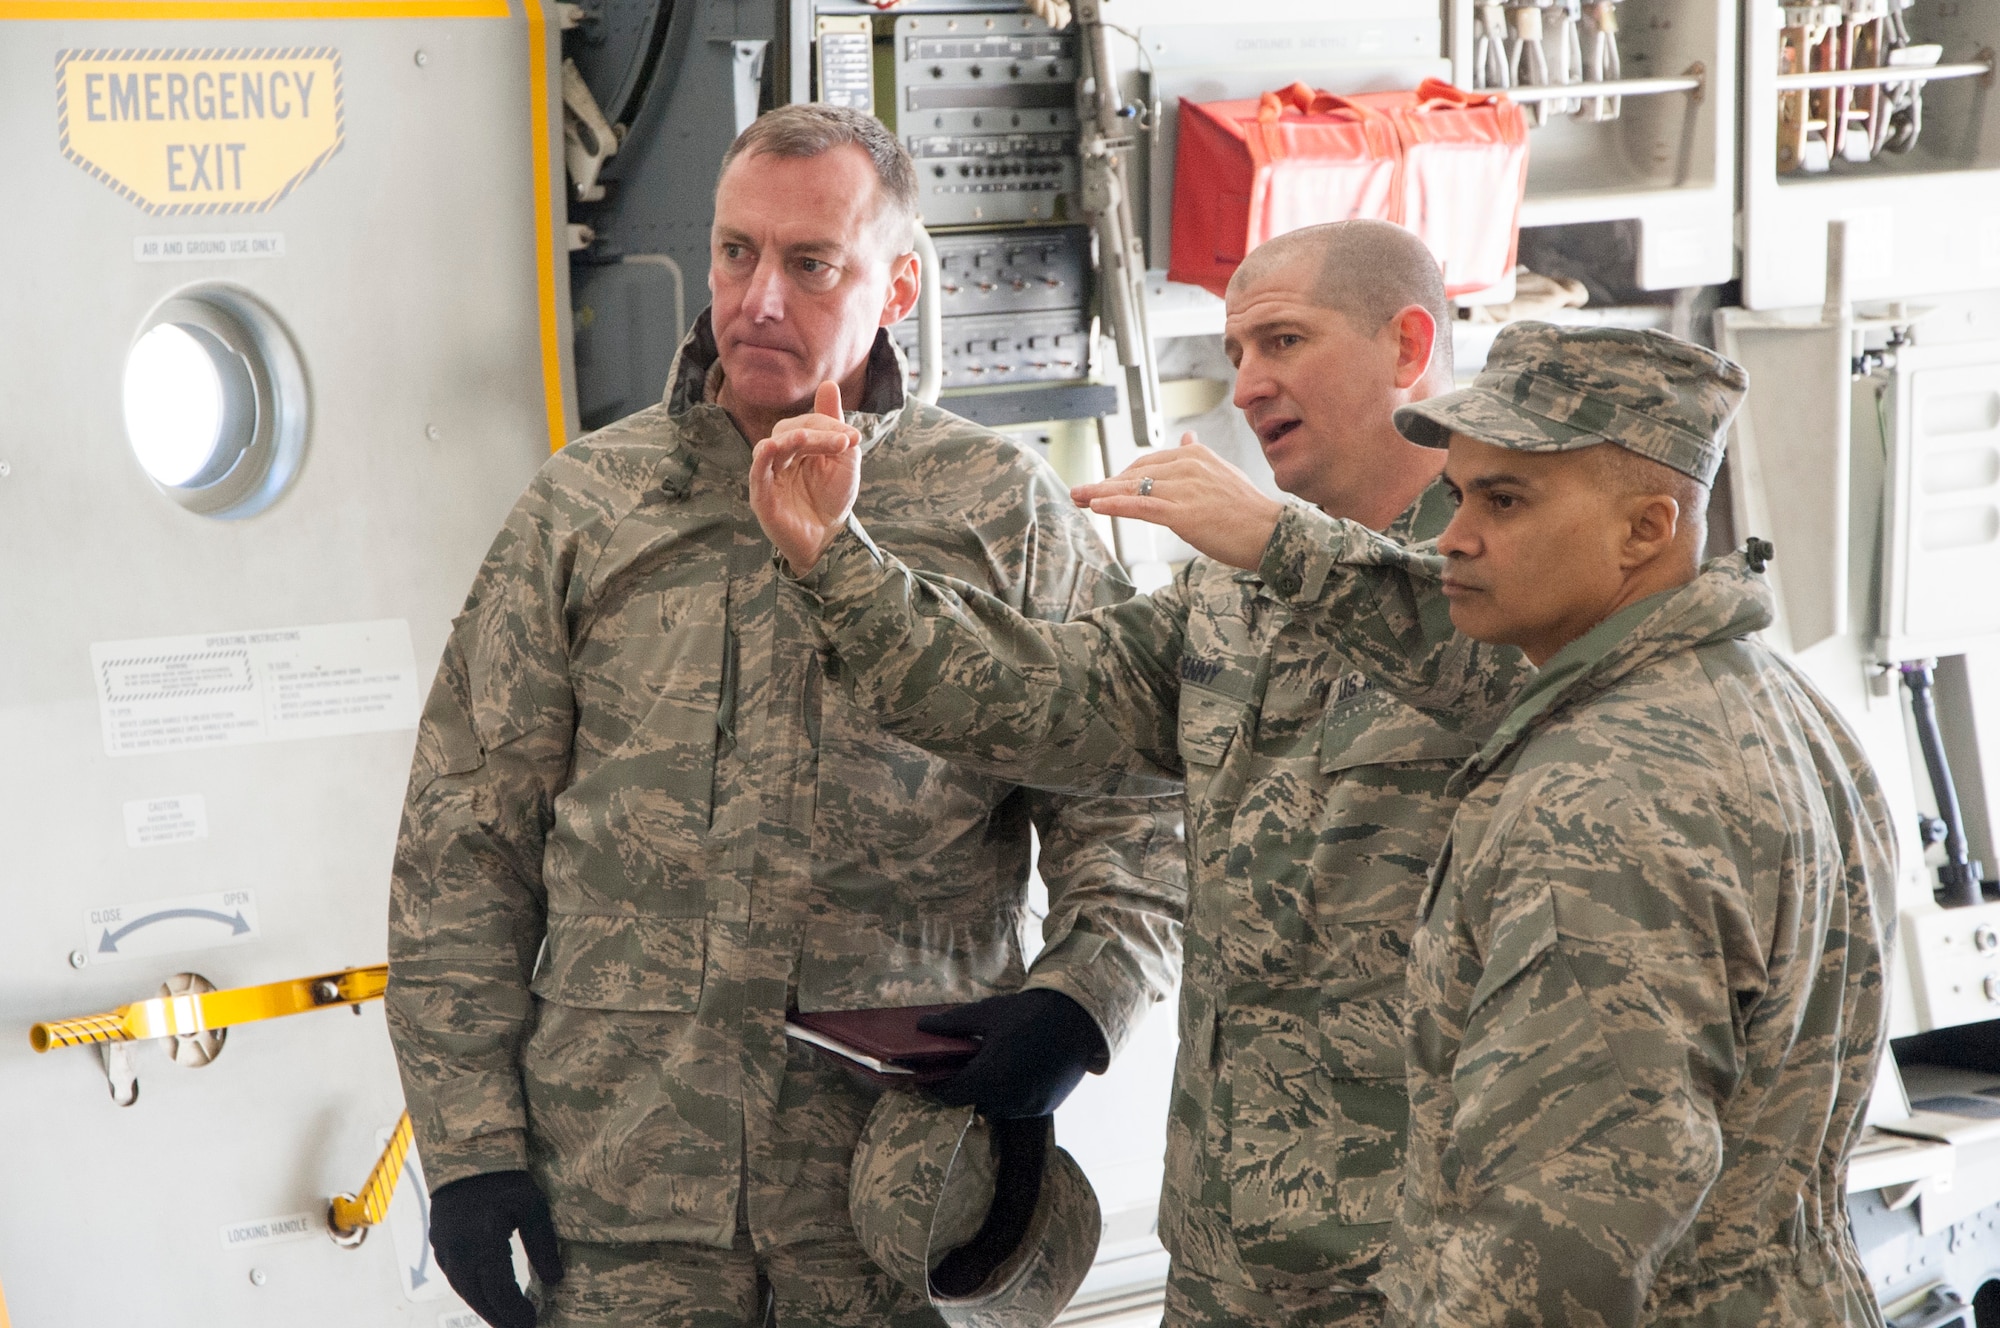 Senior Master Sgt. Brian Denny, Air Force Mortuary Affairs Operations superintendent (center), briefs Col. Daniel F. Merry, AFMAO commander, and Chief Master Sgt. Rabin Ramsook, AFMAO chief enlisted manager, about some of the behind-the-scene details during a dignified transfer divert exercise March 19, 2015, at New Castle Air National Guard Base, Del. The exercise involved 60 total force members executing a contingency DT plan at an alternate location. (U.S. Air Force photo/Senior Airman Jared Duhon) 